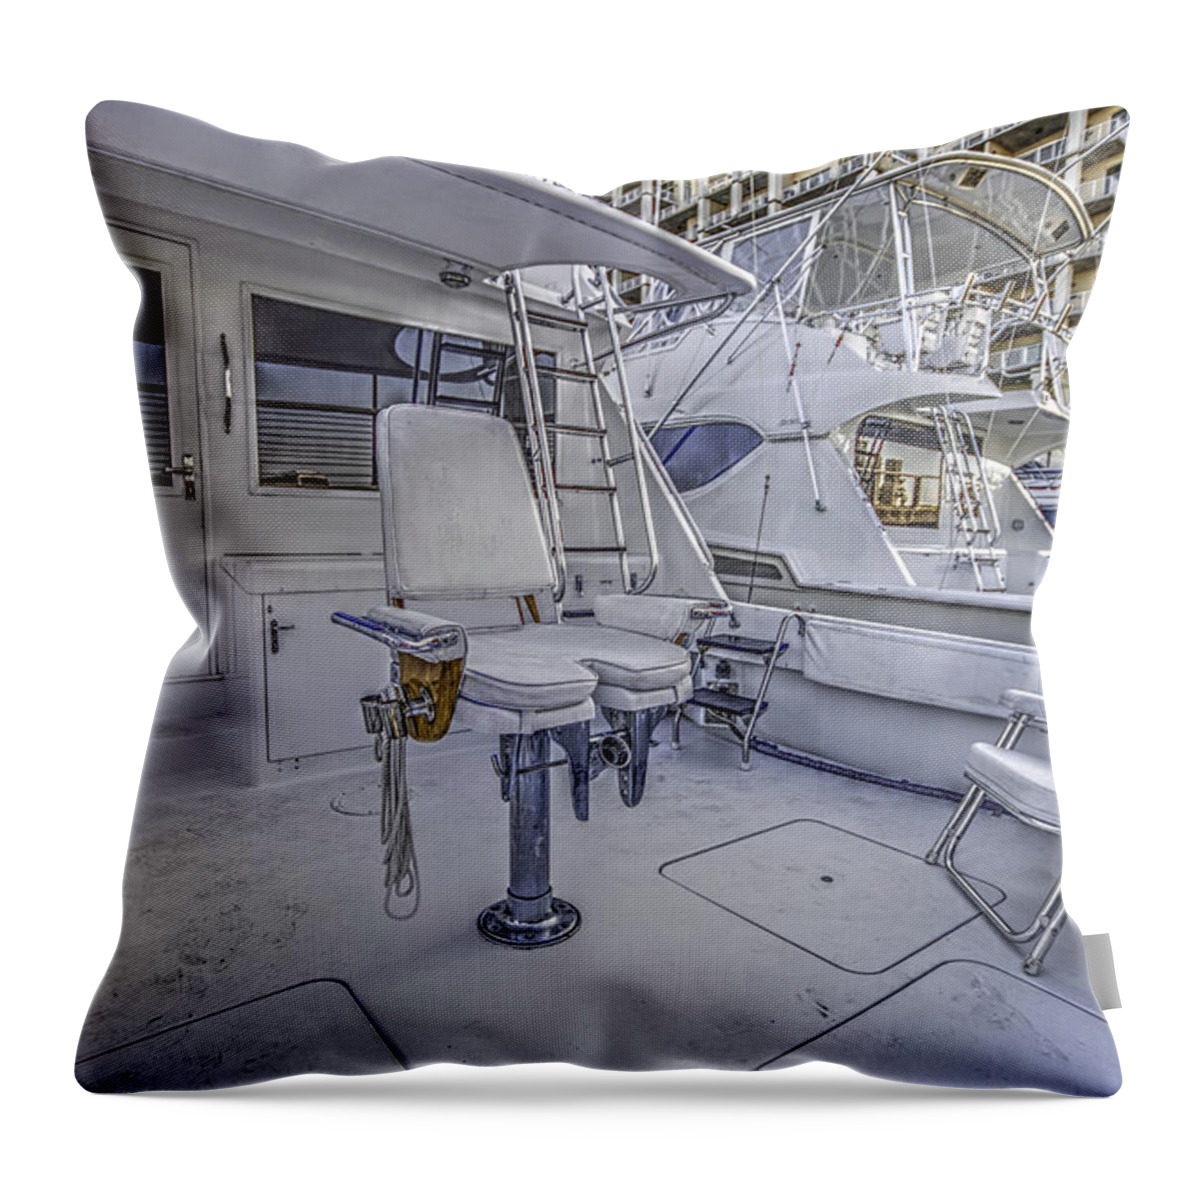 Palm Throw Pillow featuring the digital art Fighting Chair by Michael Thomas